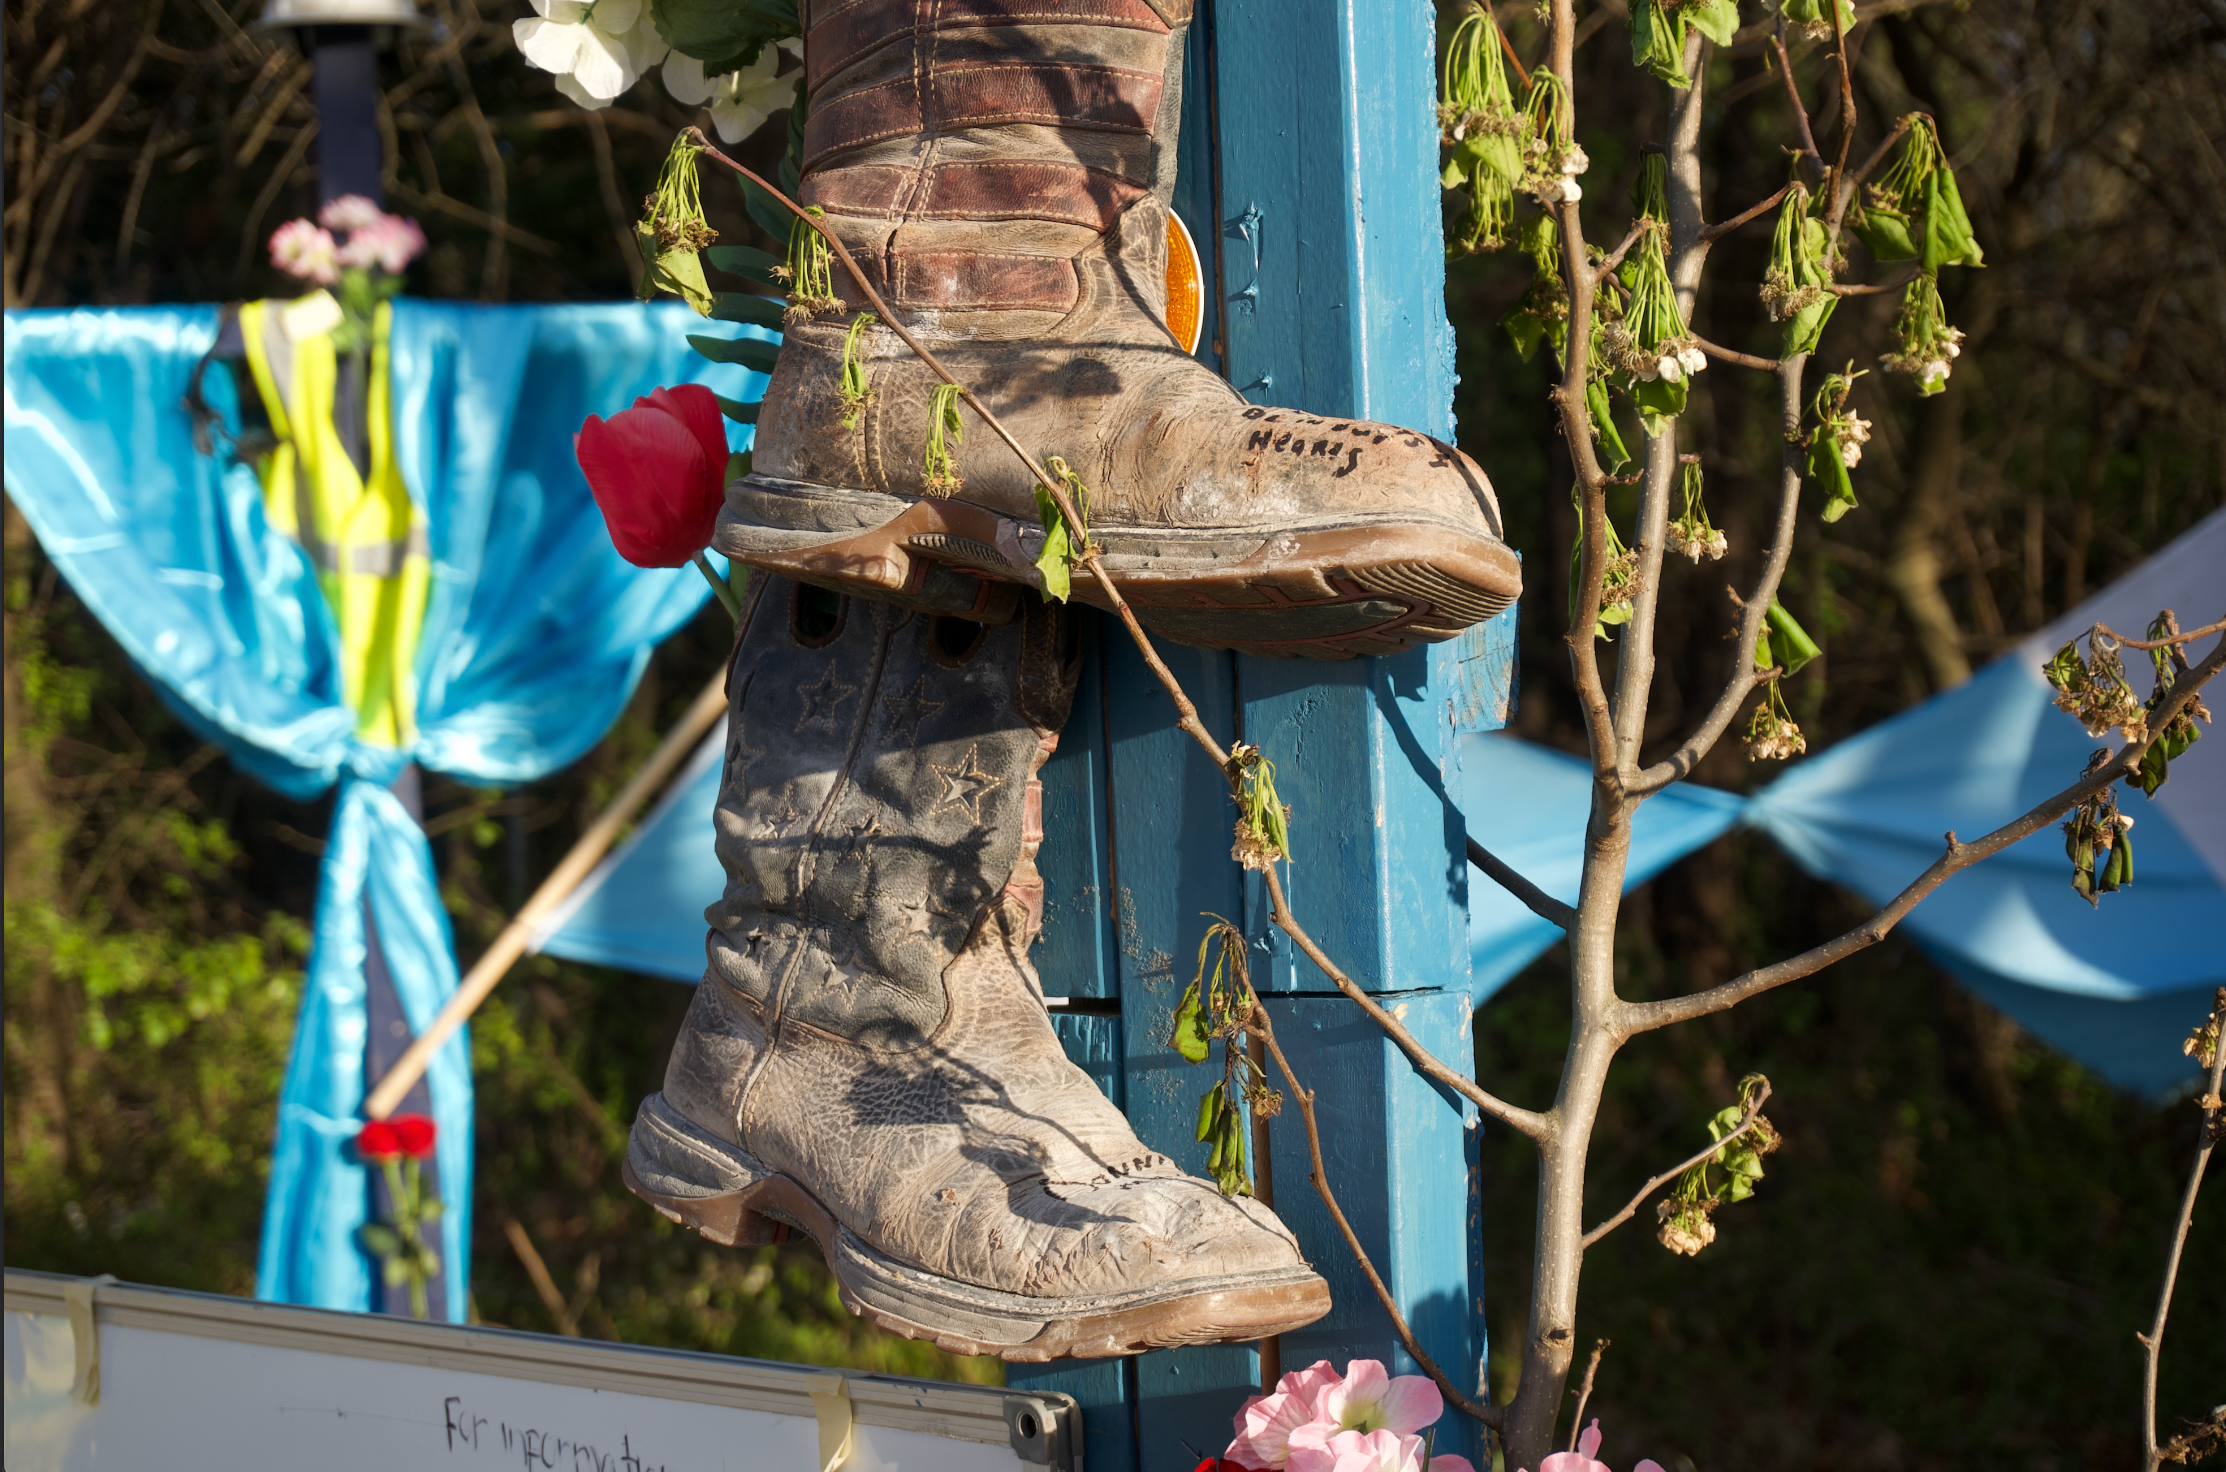 A friend and colleague of the men who died left his construction boots on one of the crosses at the memorial to honor the victims of the Francis Scott Key Bridge Collapse.